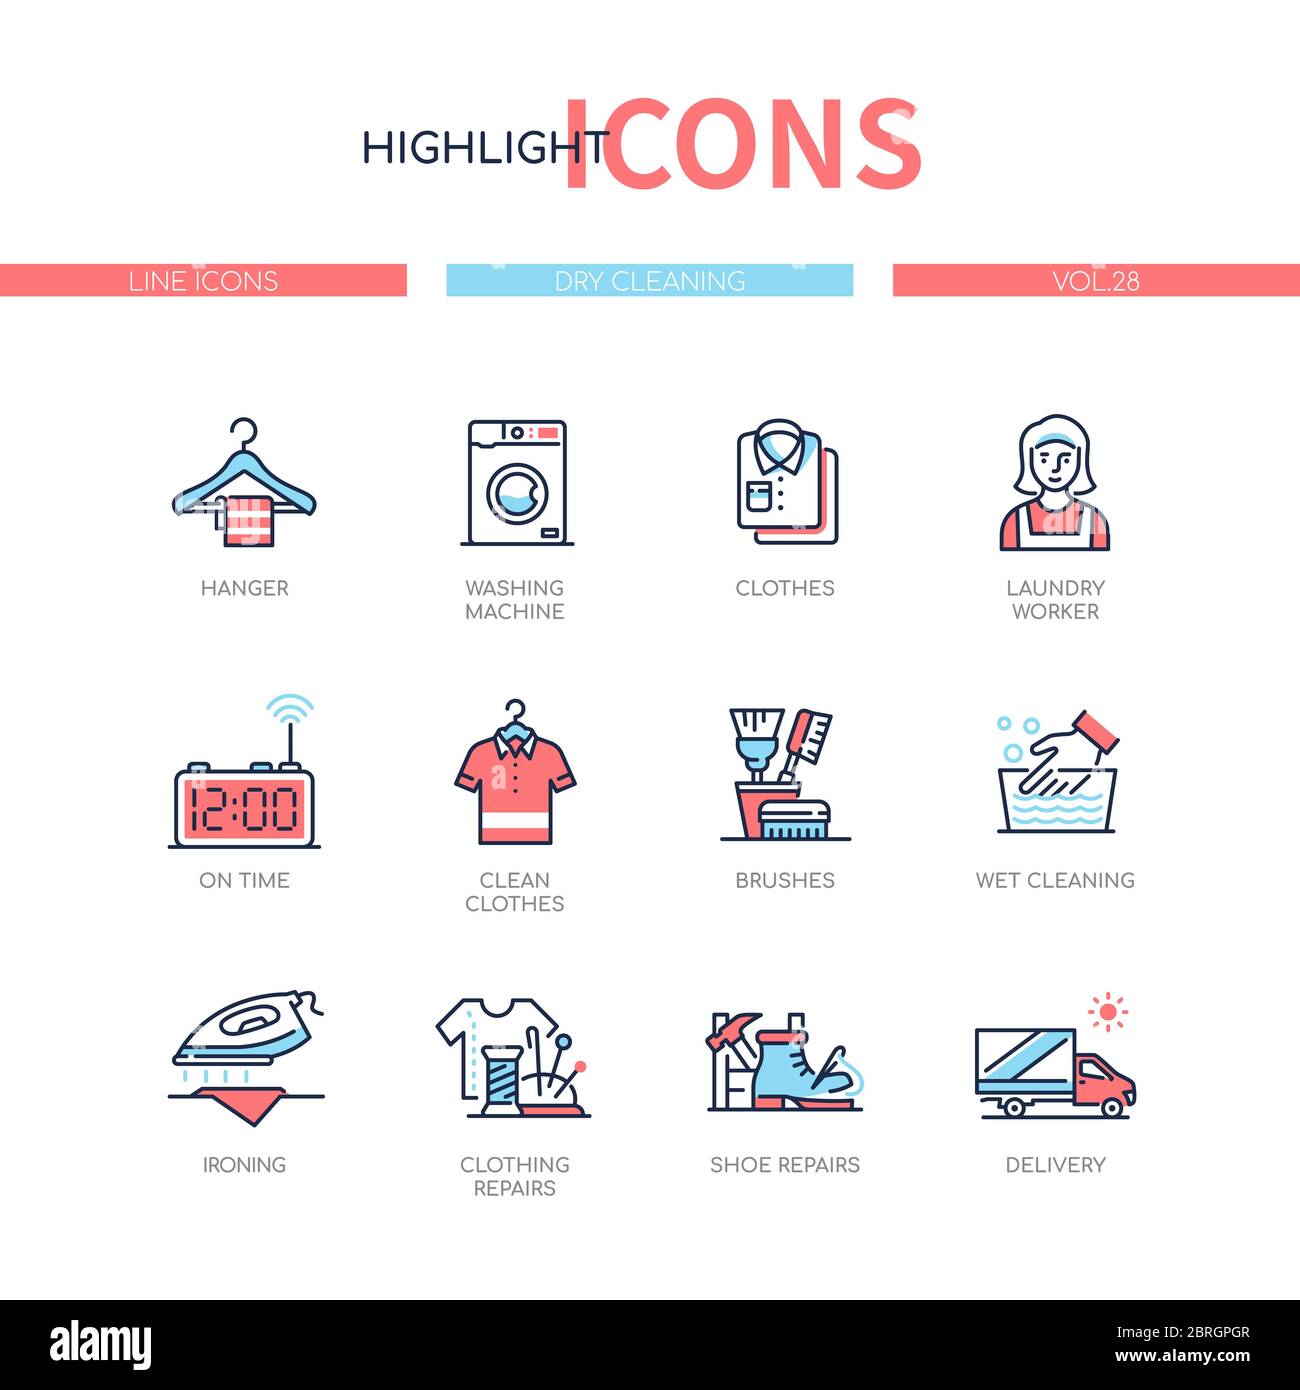 Dry cleaning - line design style icons set Stock Vector